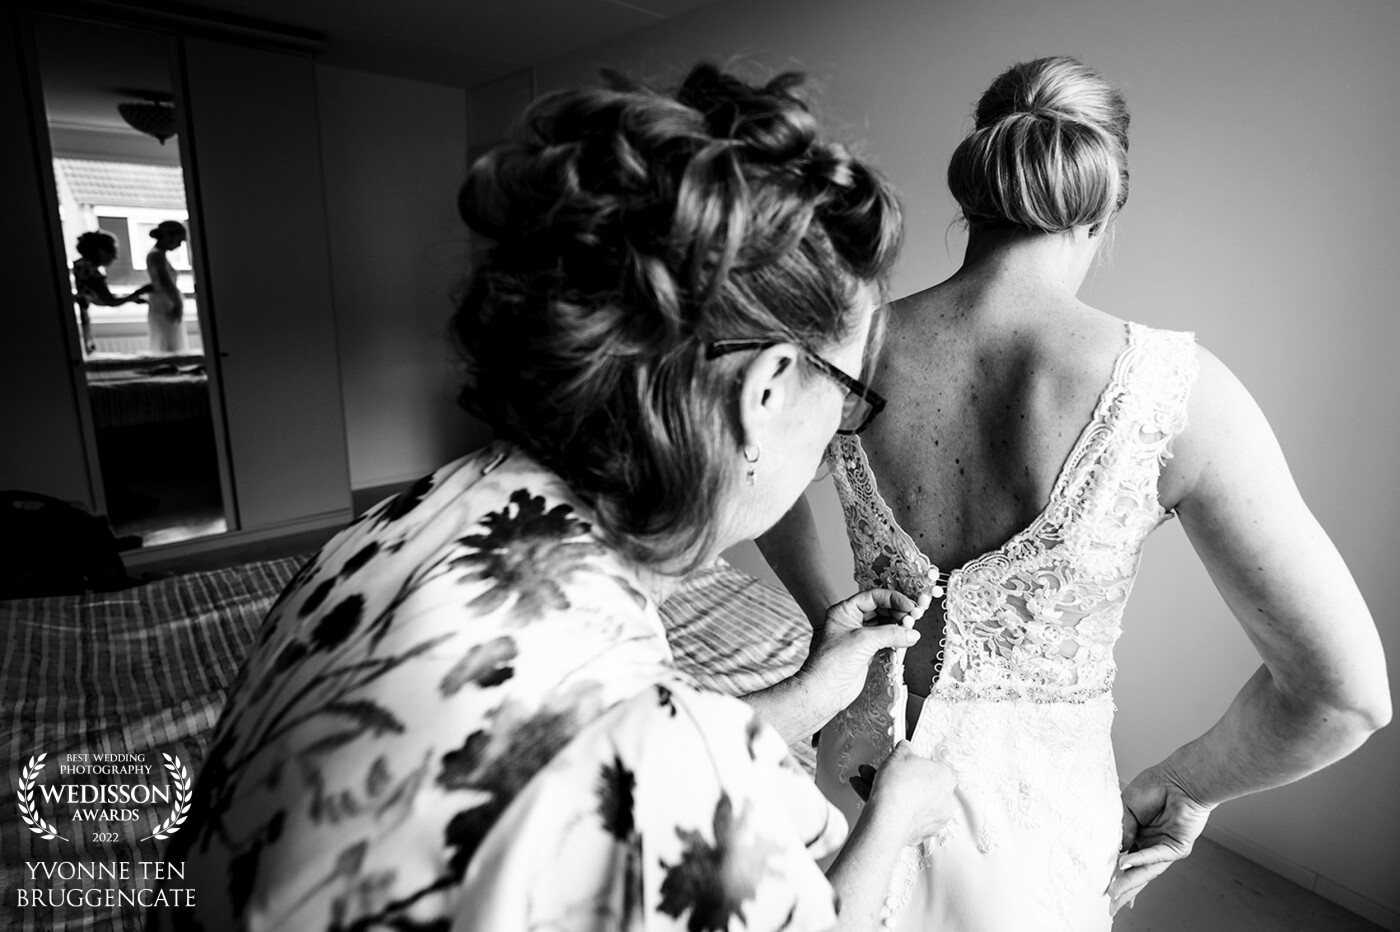 Getting ready in the sleeping room of her parents. Away from the chaotic hair and make-up room. Just some quit time alone for the mother of the bride and het daughter. Such a special moment together!